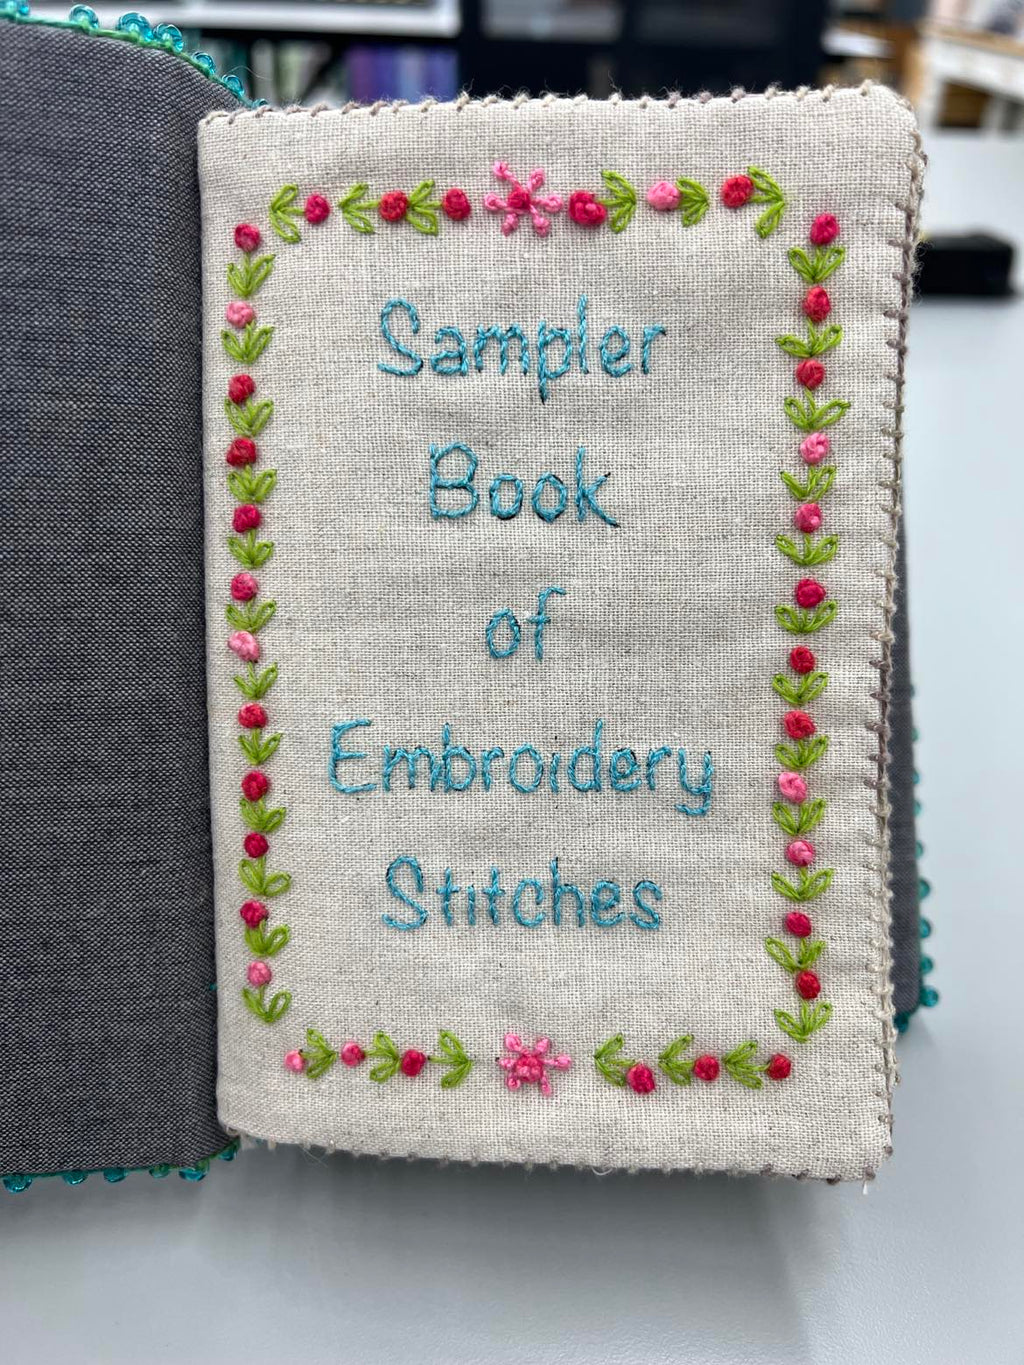 60 stitch Embroidery Sampler Book - Right Hand Instructions ⋆ Nifty  NeedlesNifty Needles